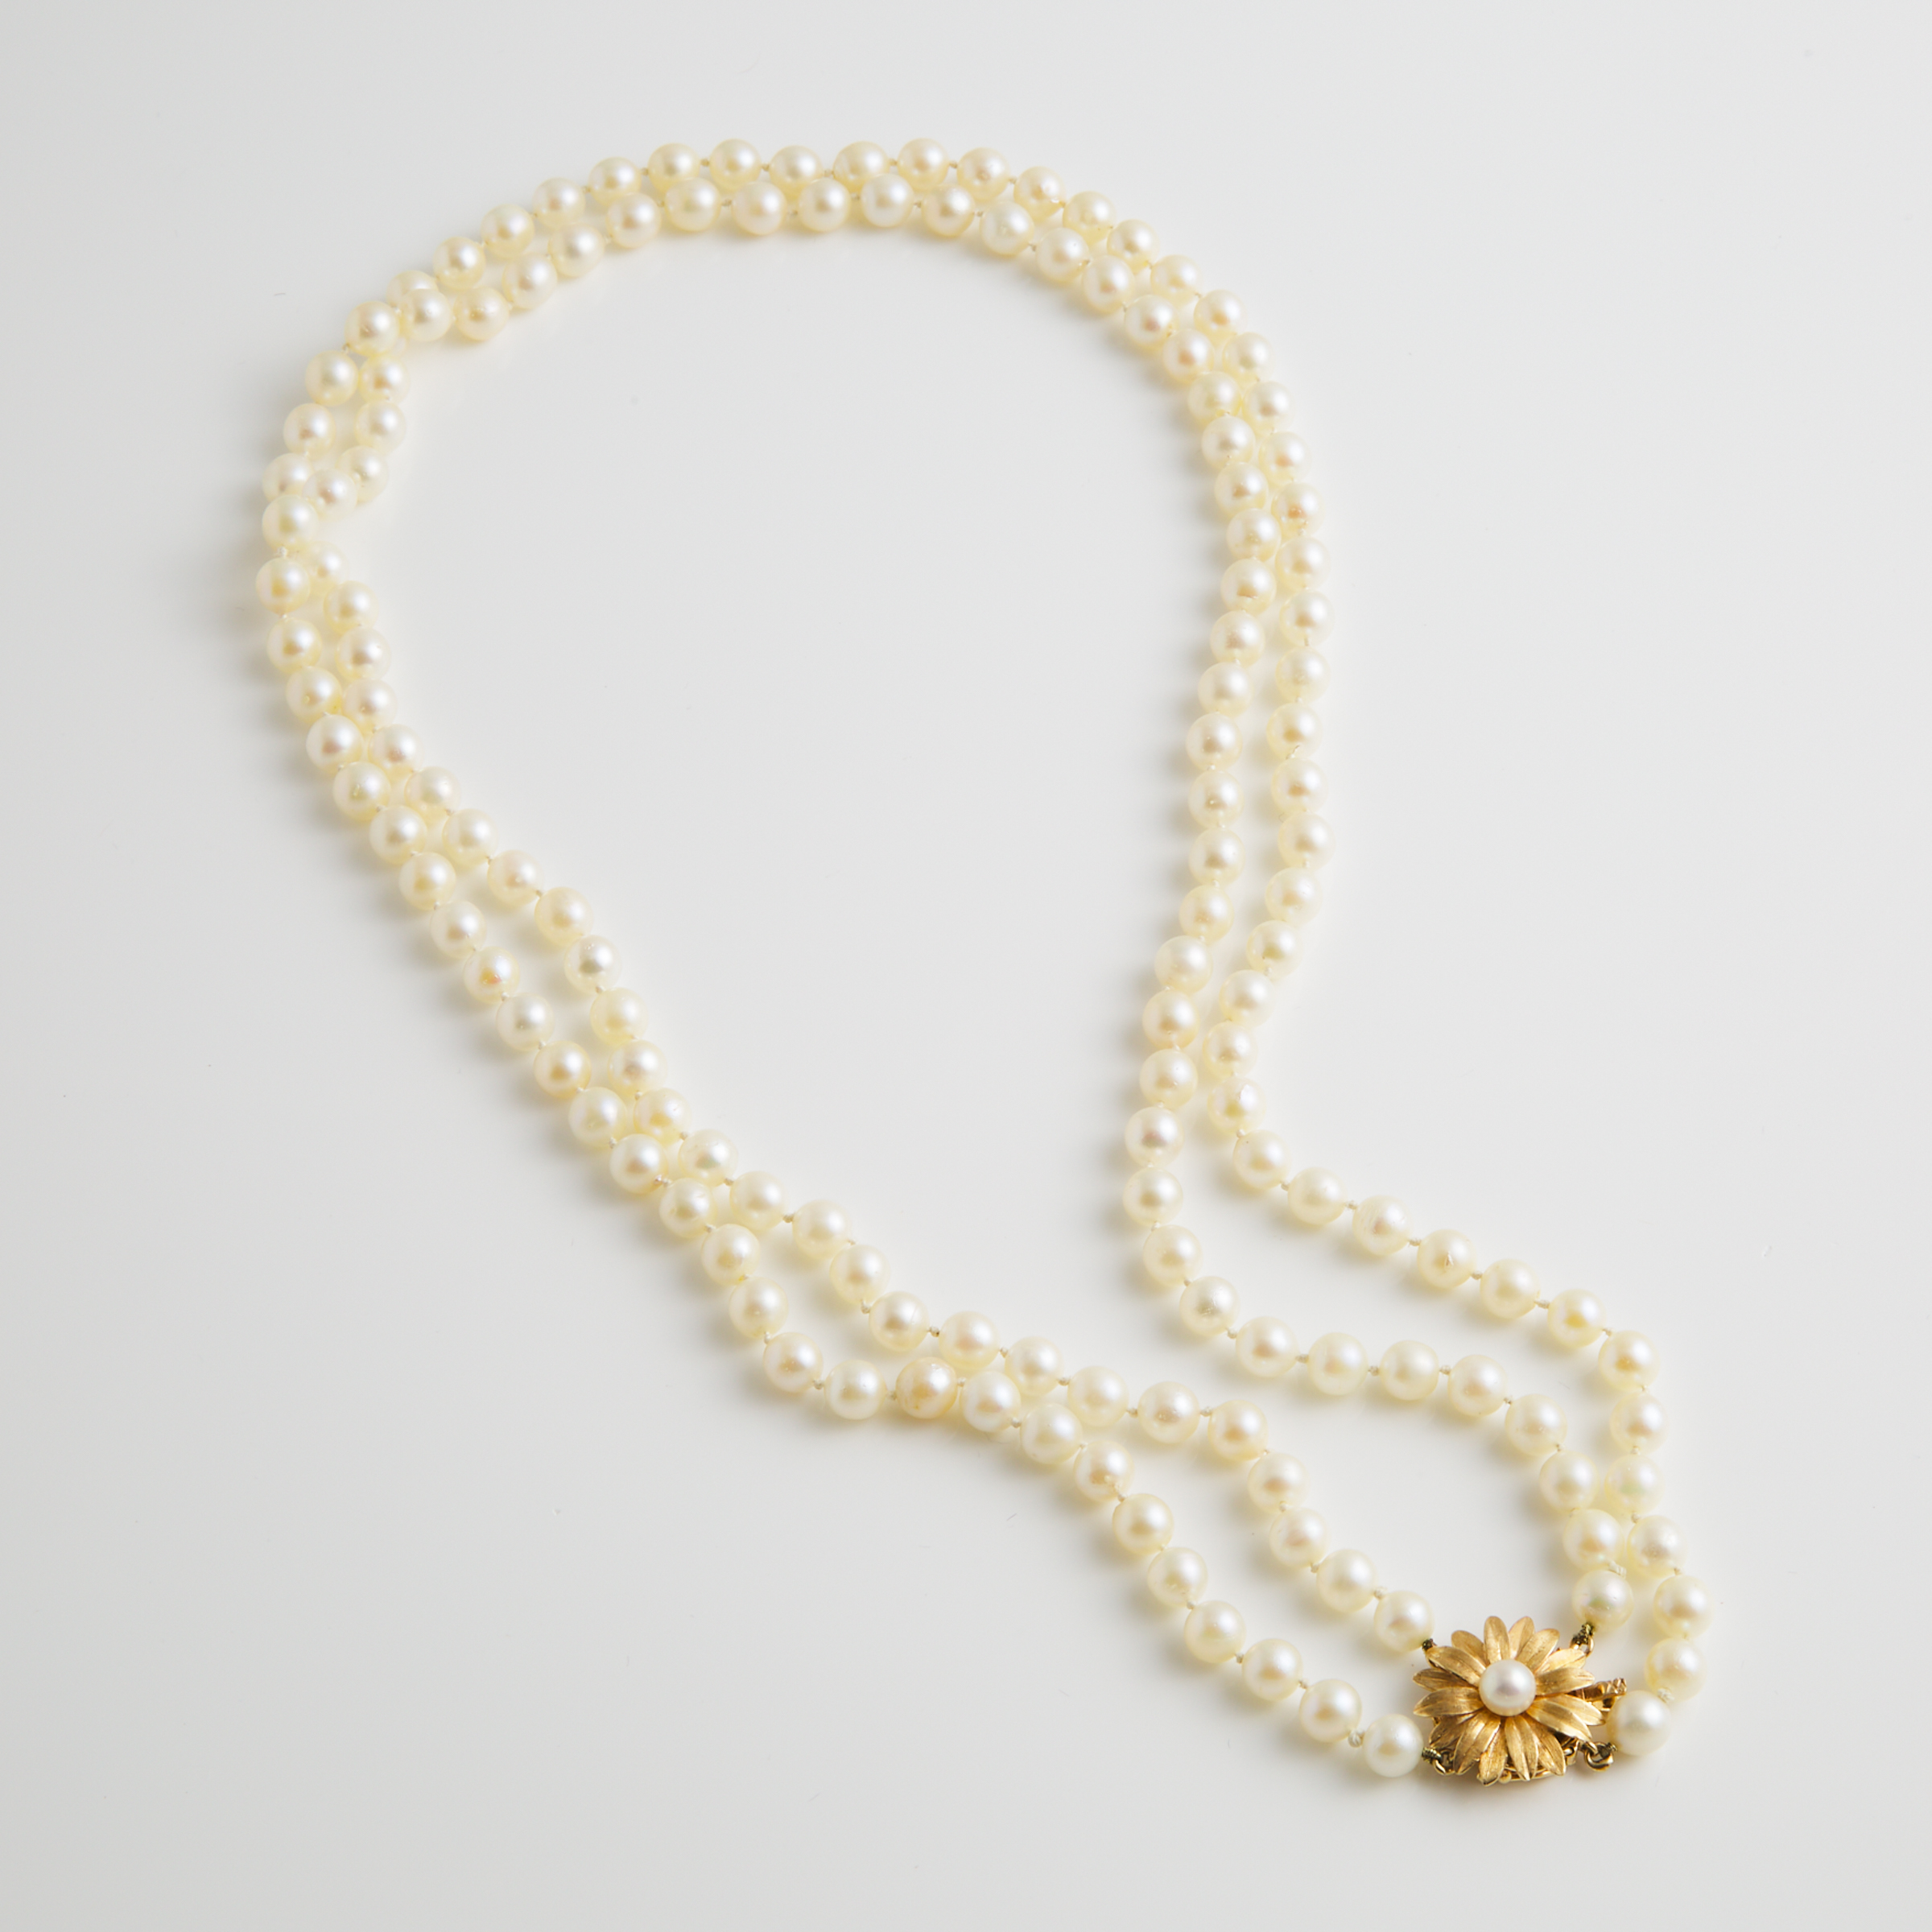 Double Strand Of Cultured Pearls Necklace